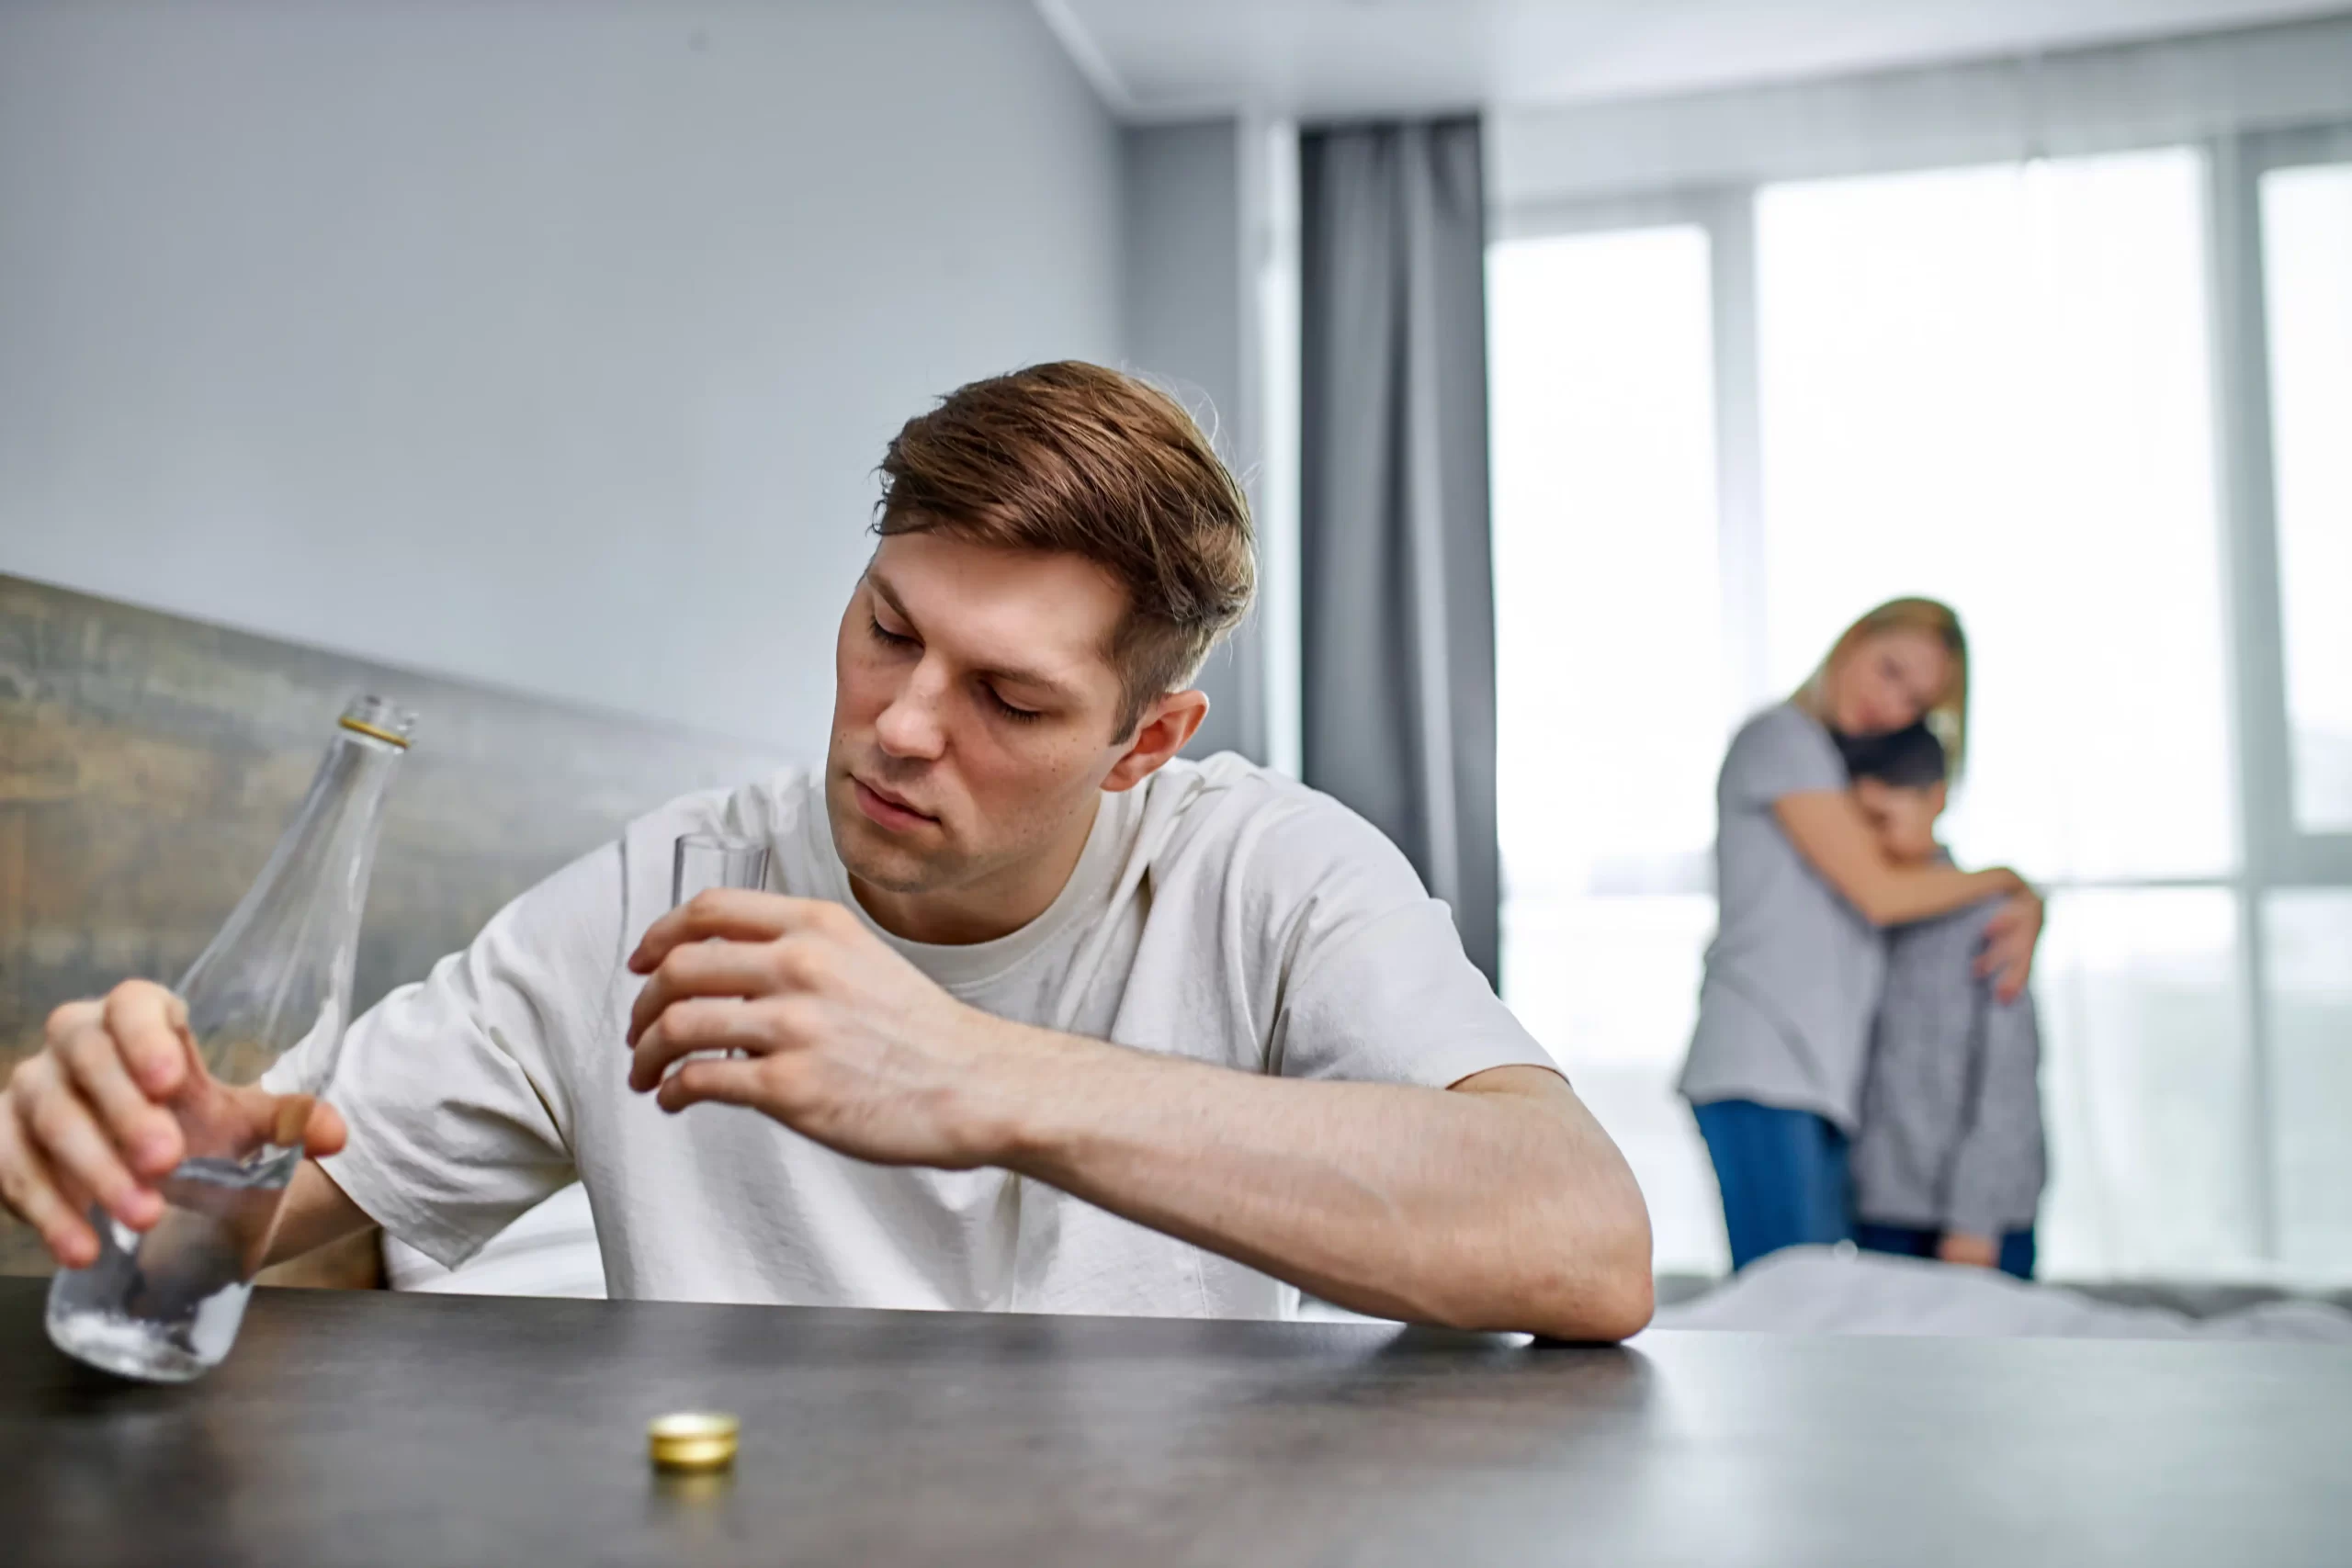 man struggling with addiction with wife and kid in the background experiences trauma